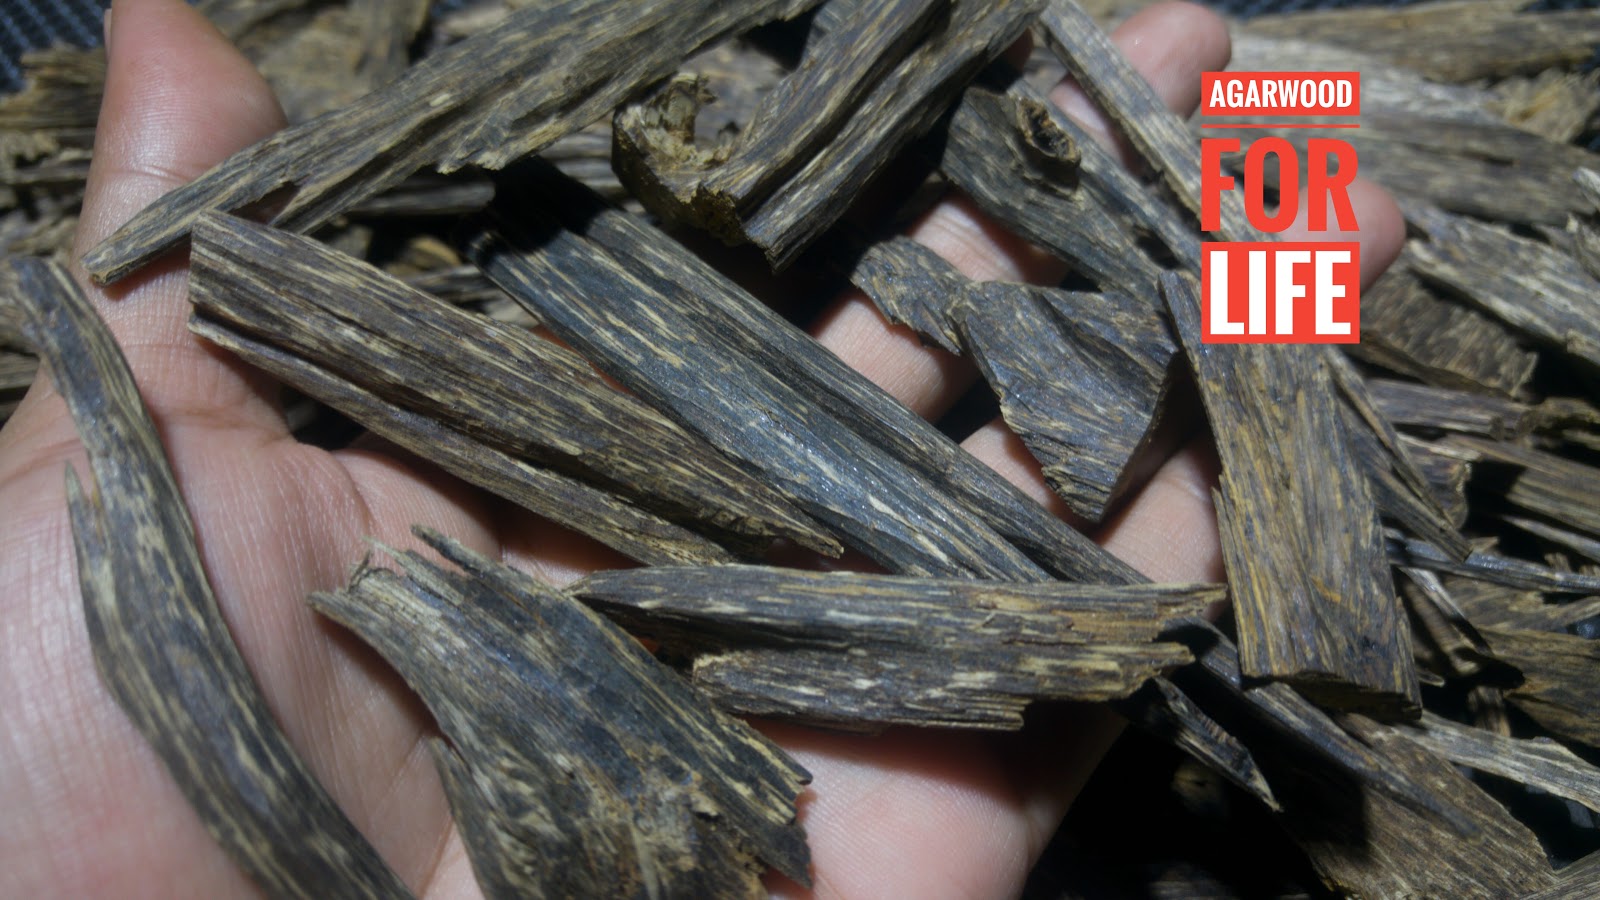 Agarwood For Life: "Grade A" of agarwood or Oud for ...